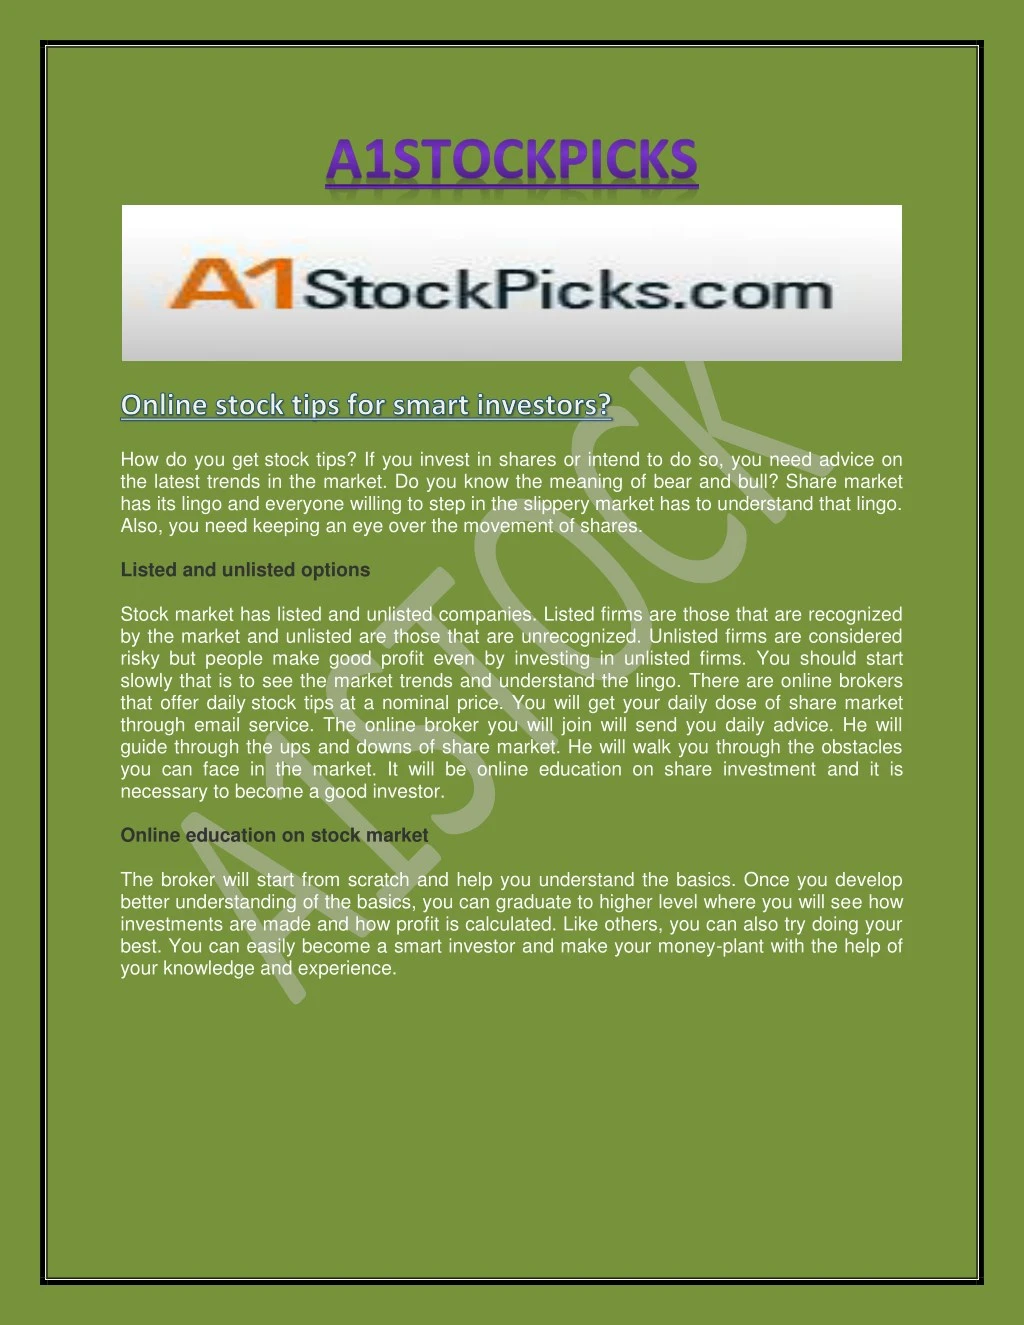 how do you get stock tips if you invest in shares